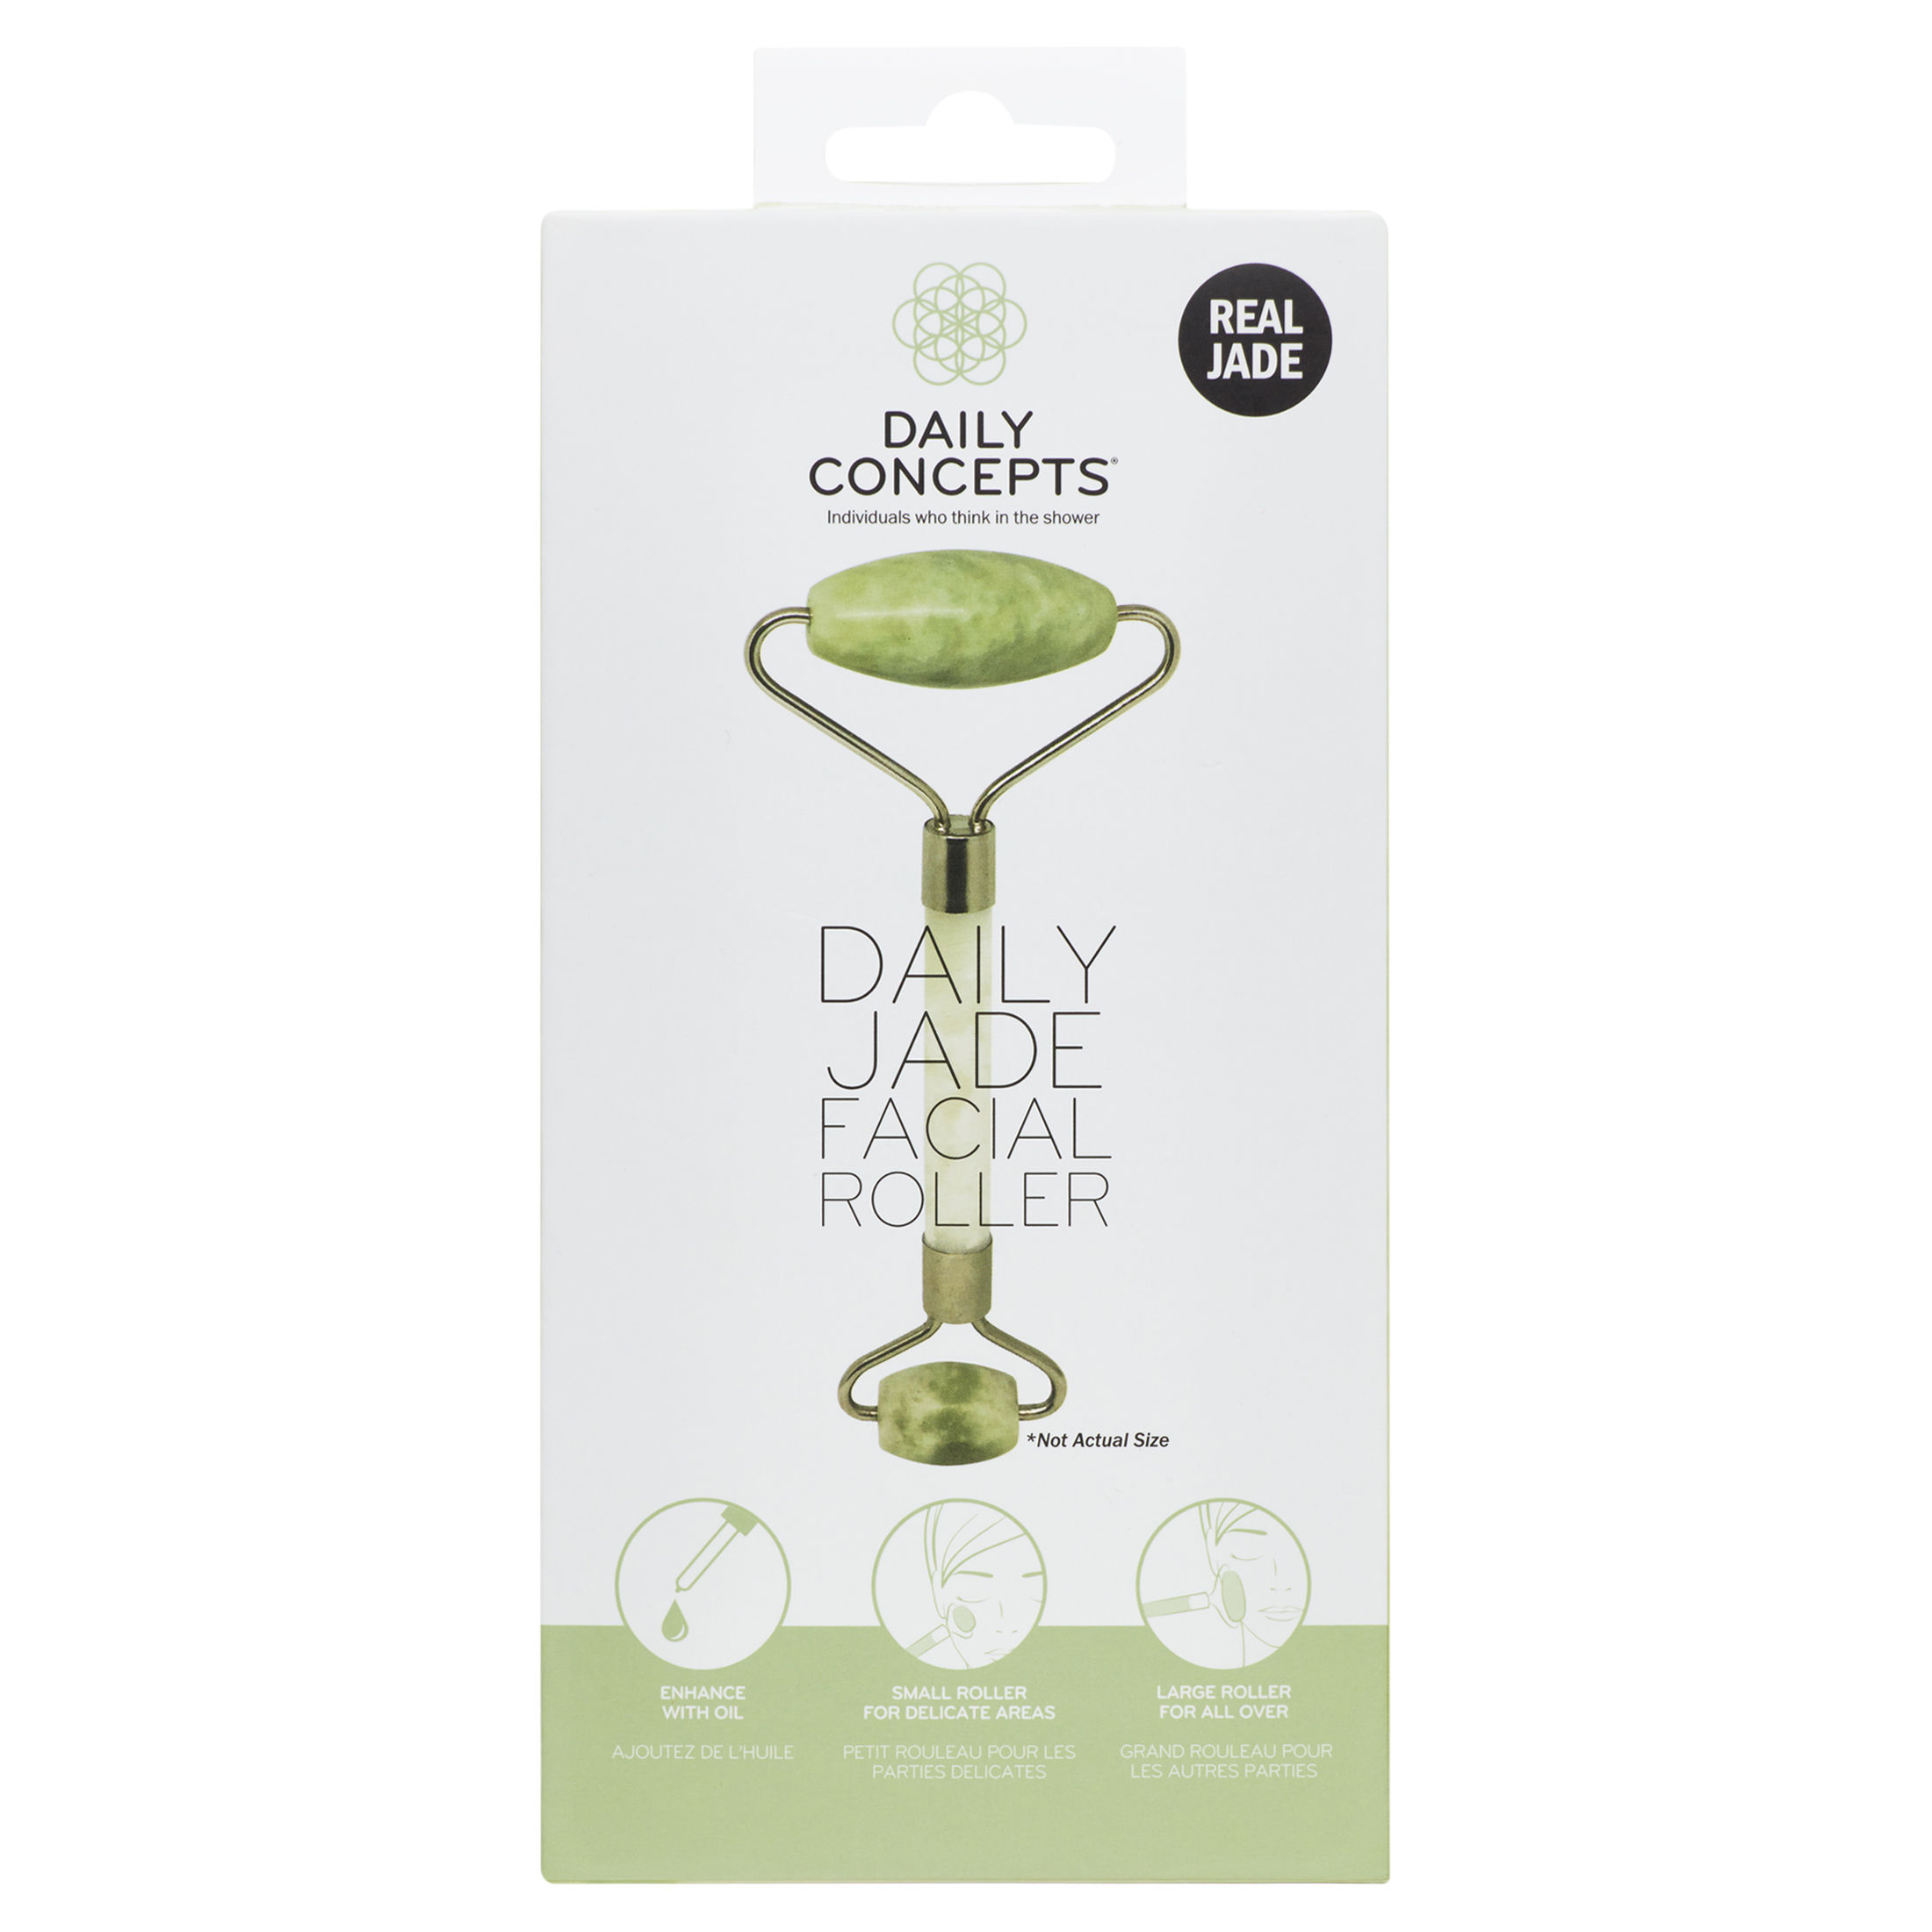 Daily Concepts Daily Jade Facial Roller - image 1 of 6